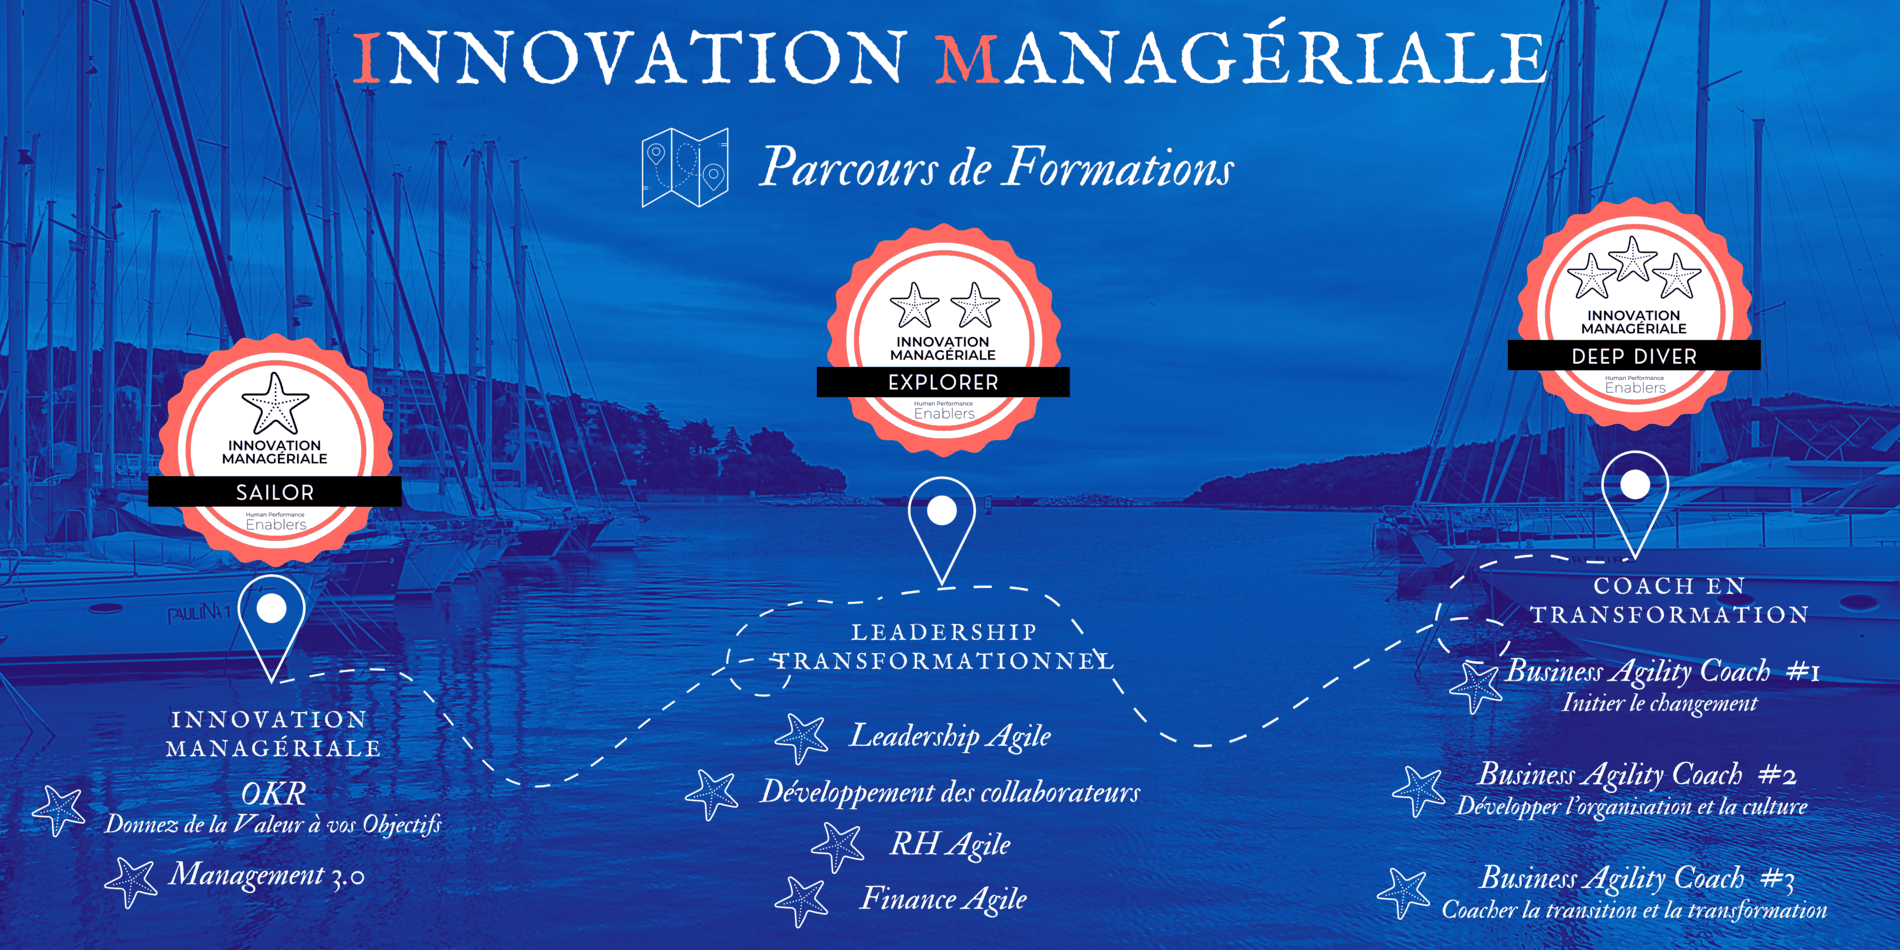 Innovation Managériale